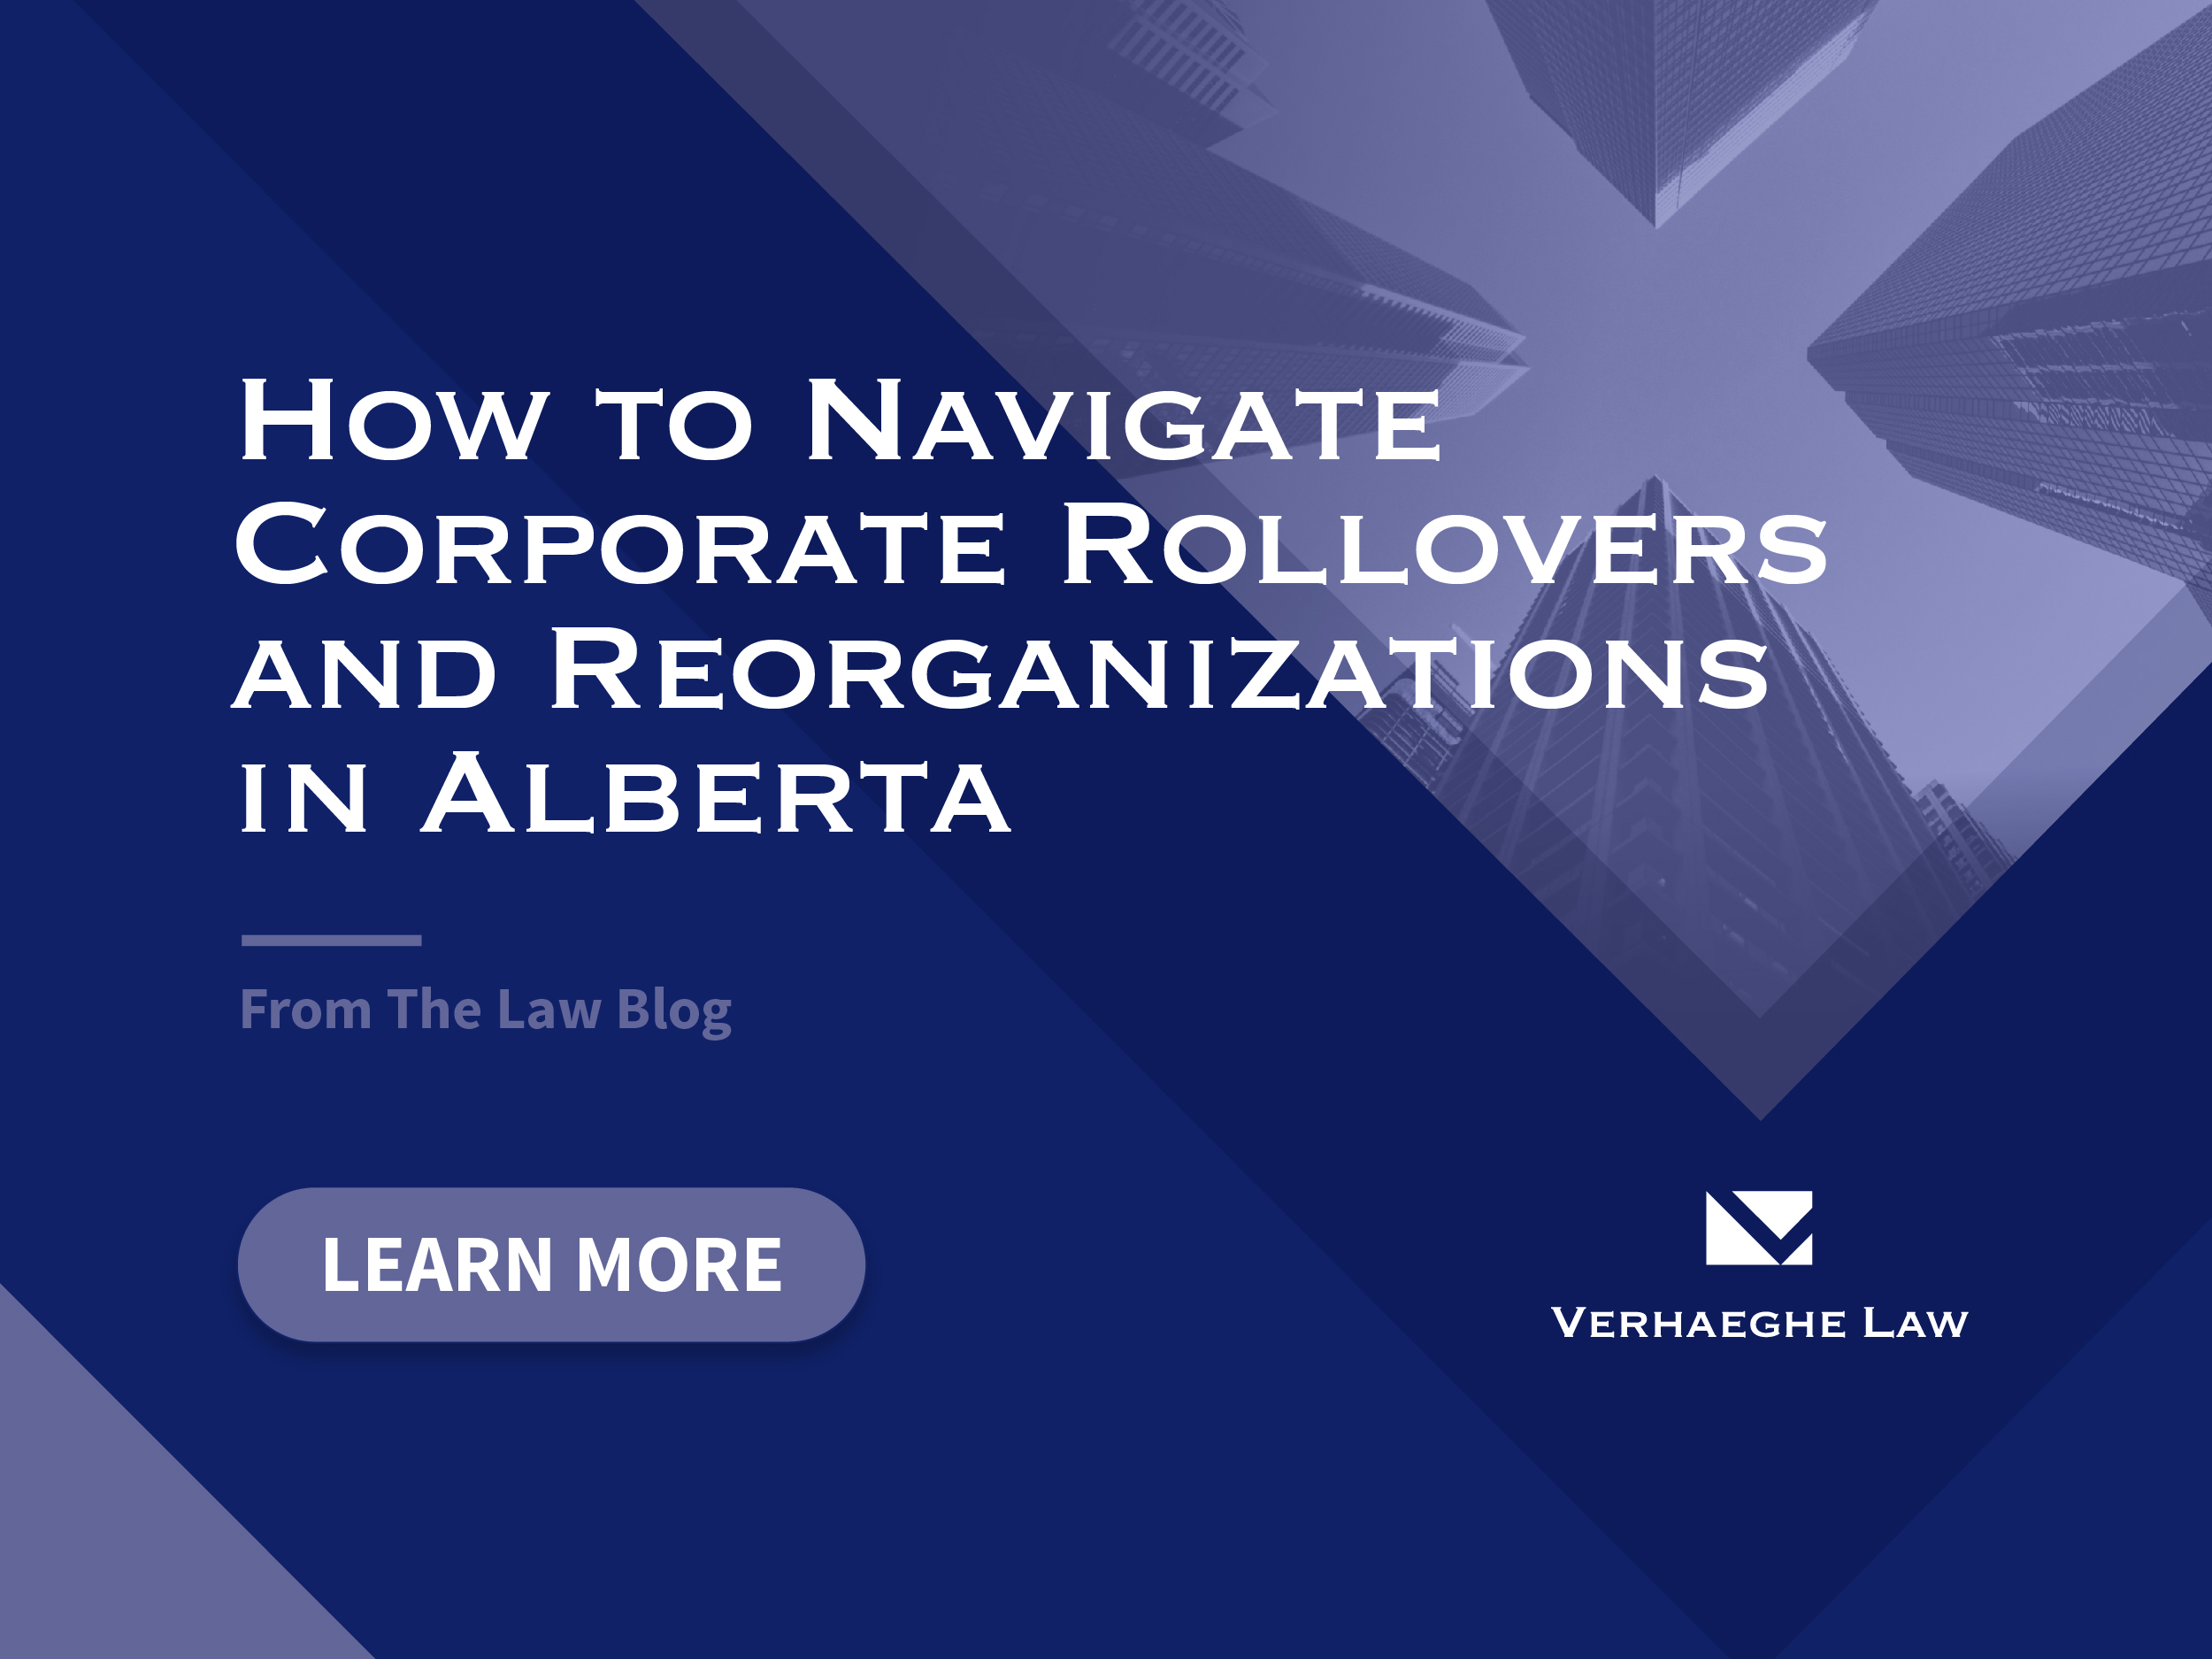 How to navigate corporate rollovers and reorganizations in Alberta